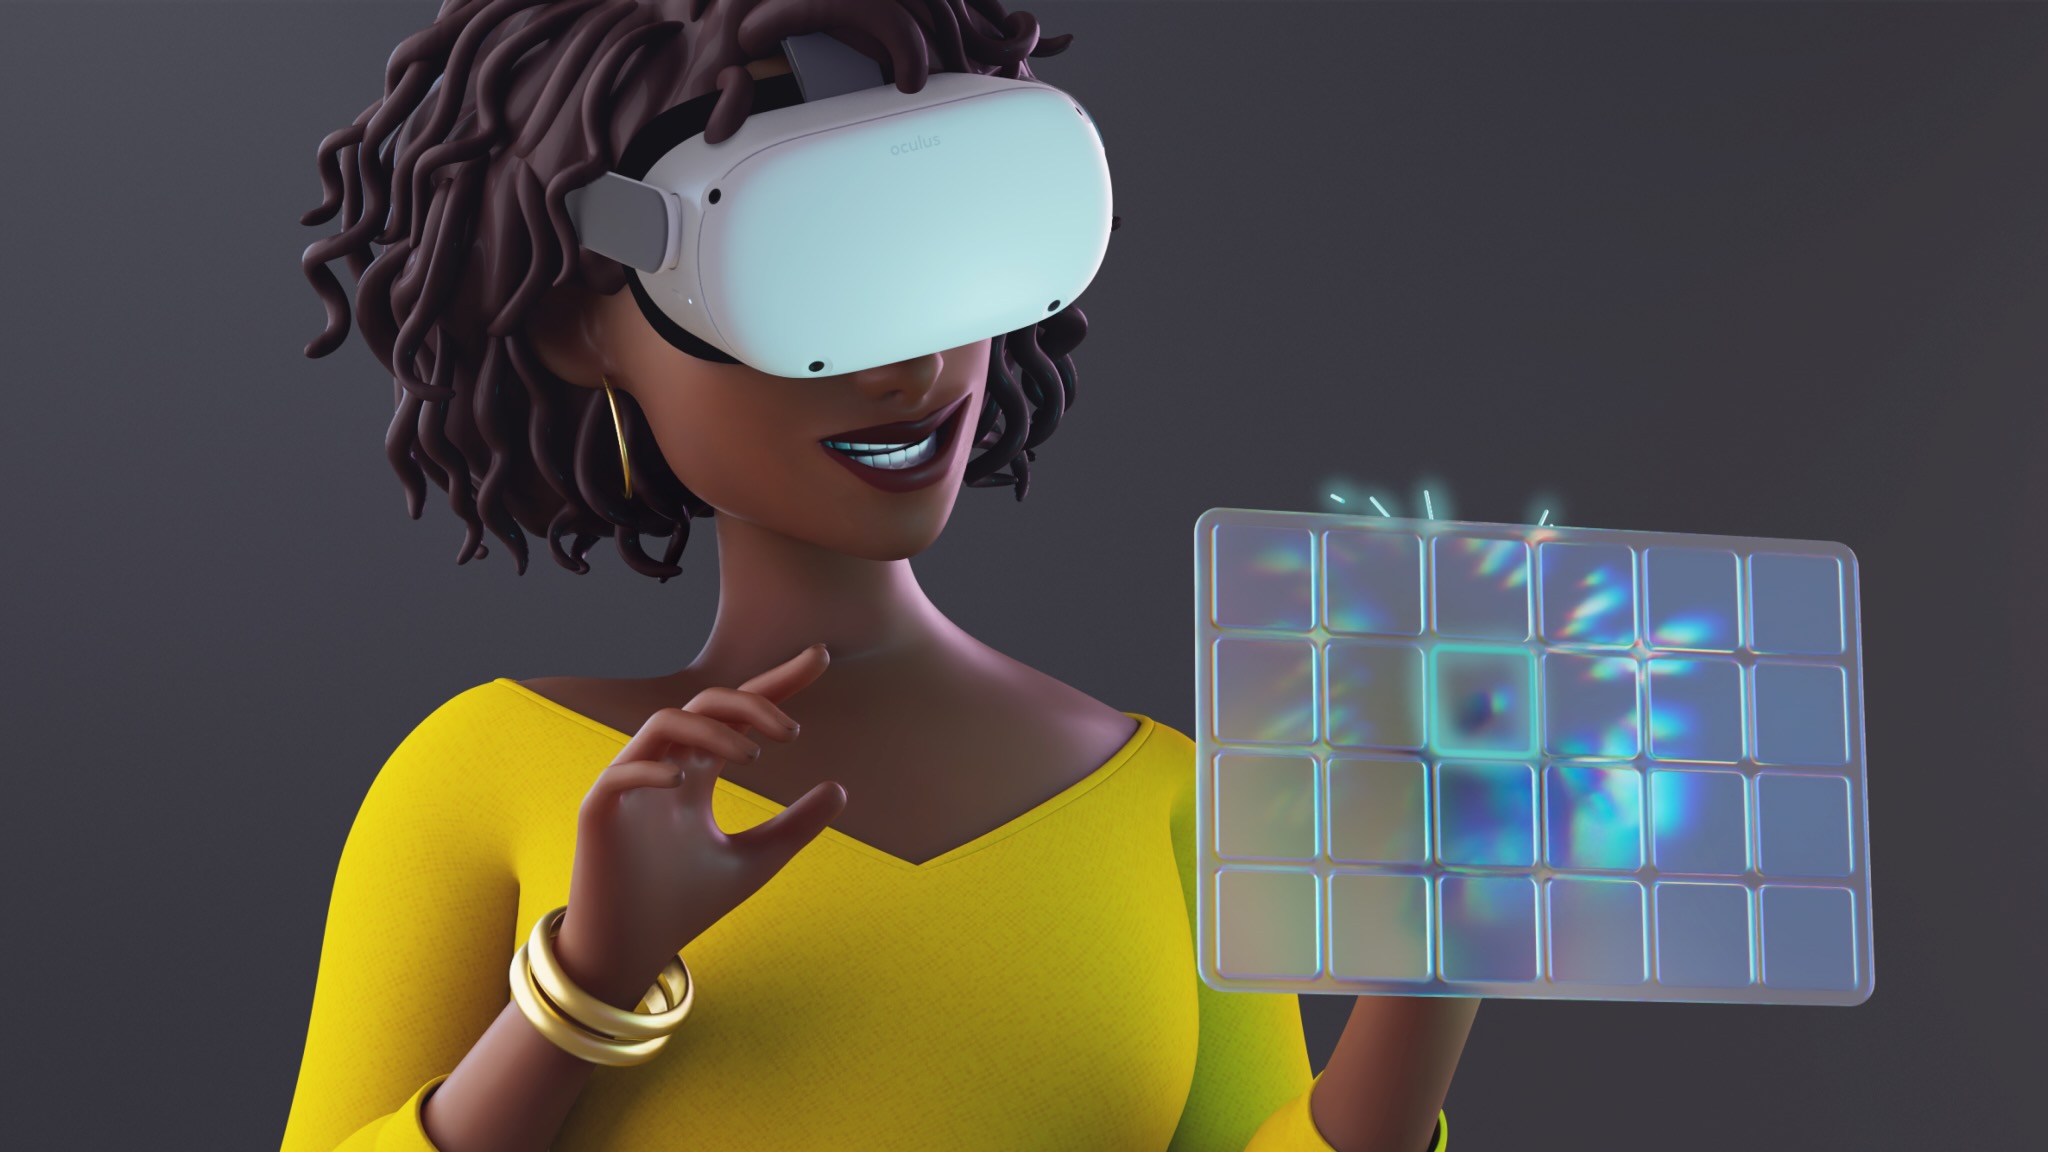 Meta Quest 2 promo image showing a Quest 2-wearing woman tapping a virtual display with her finger via Direct Touch.